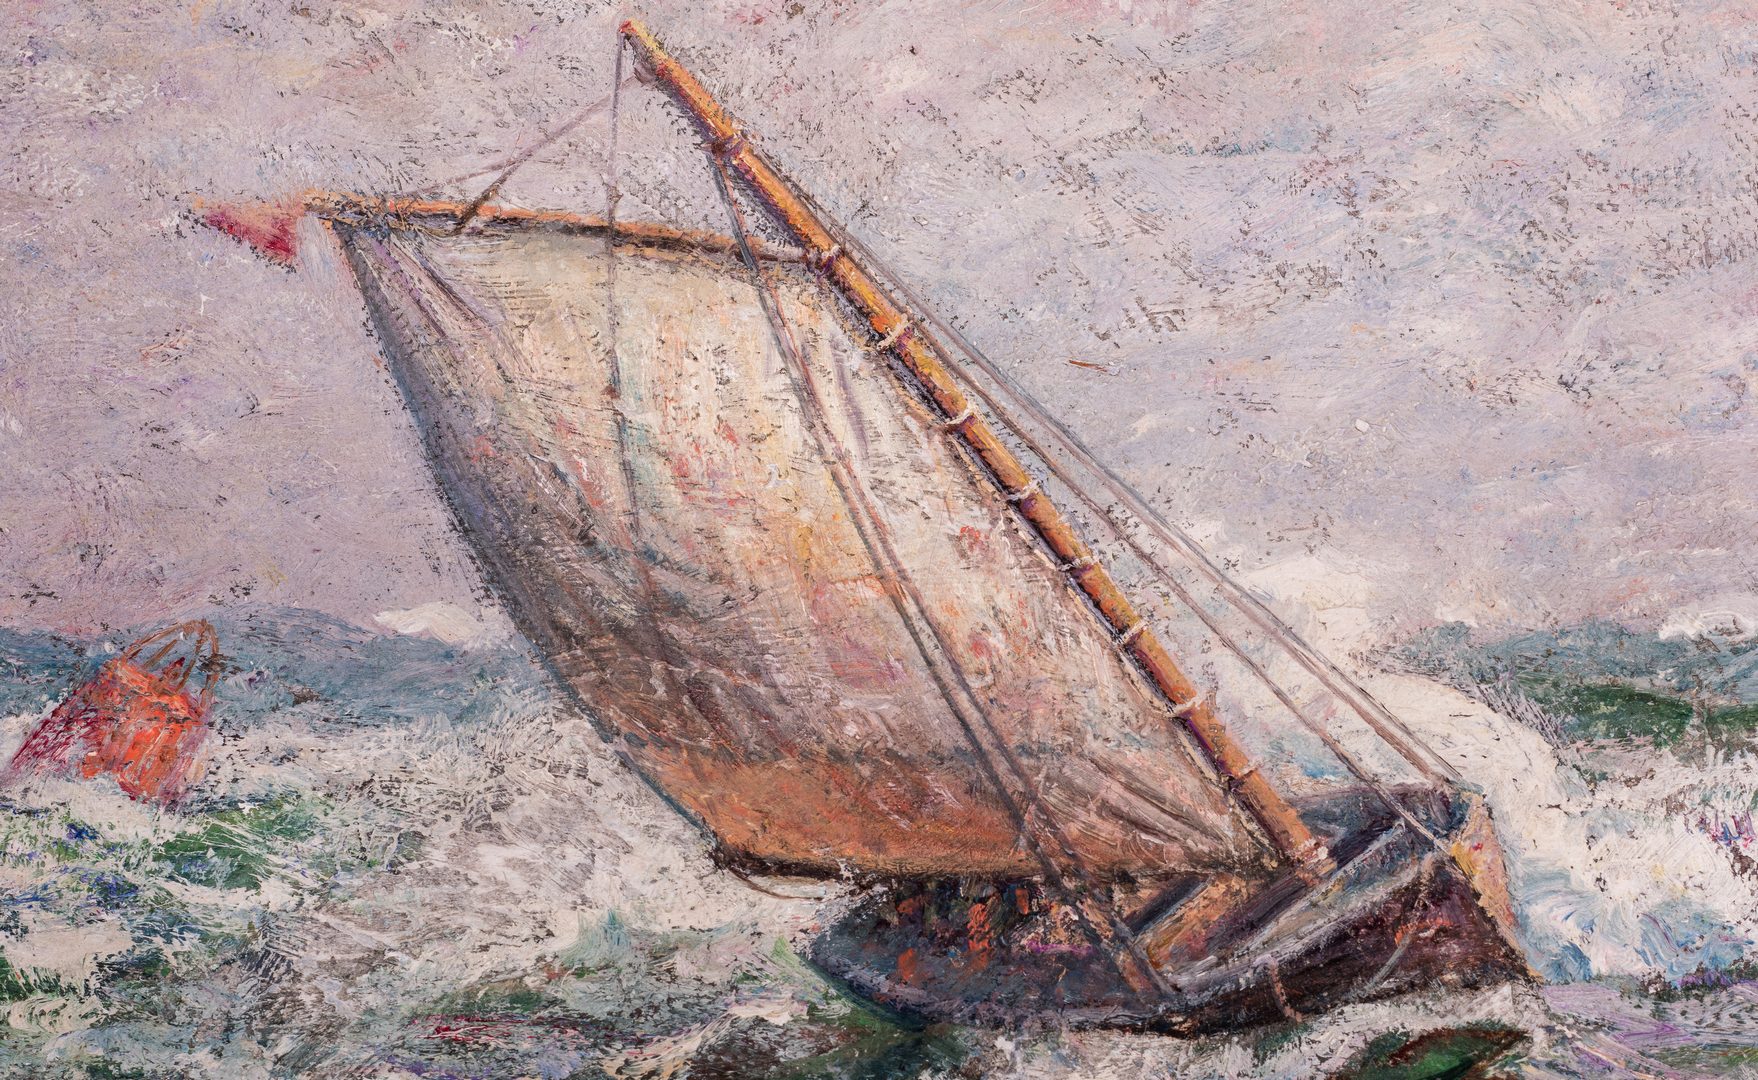 Lot 752: James Tyler, O/C, Painting of a Ship